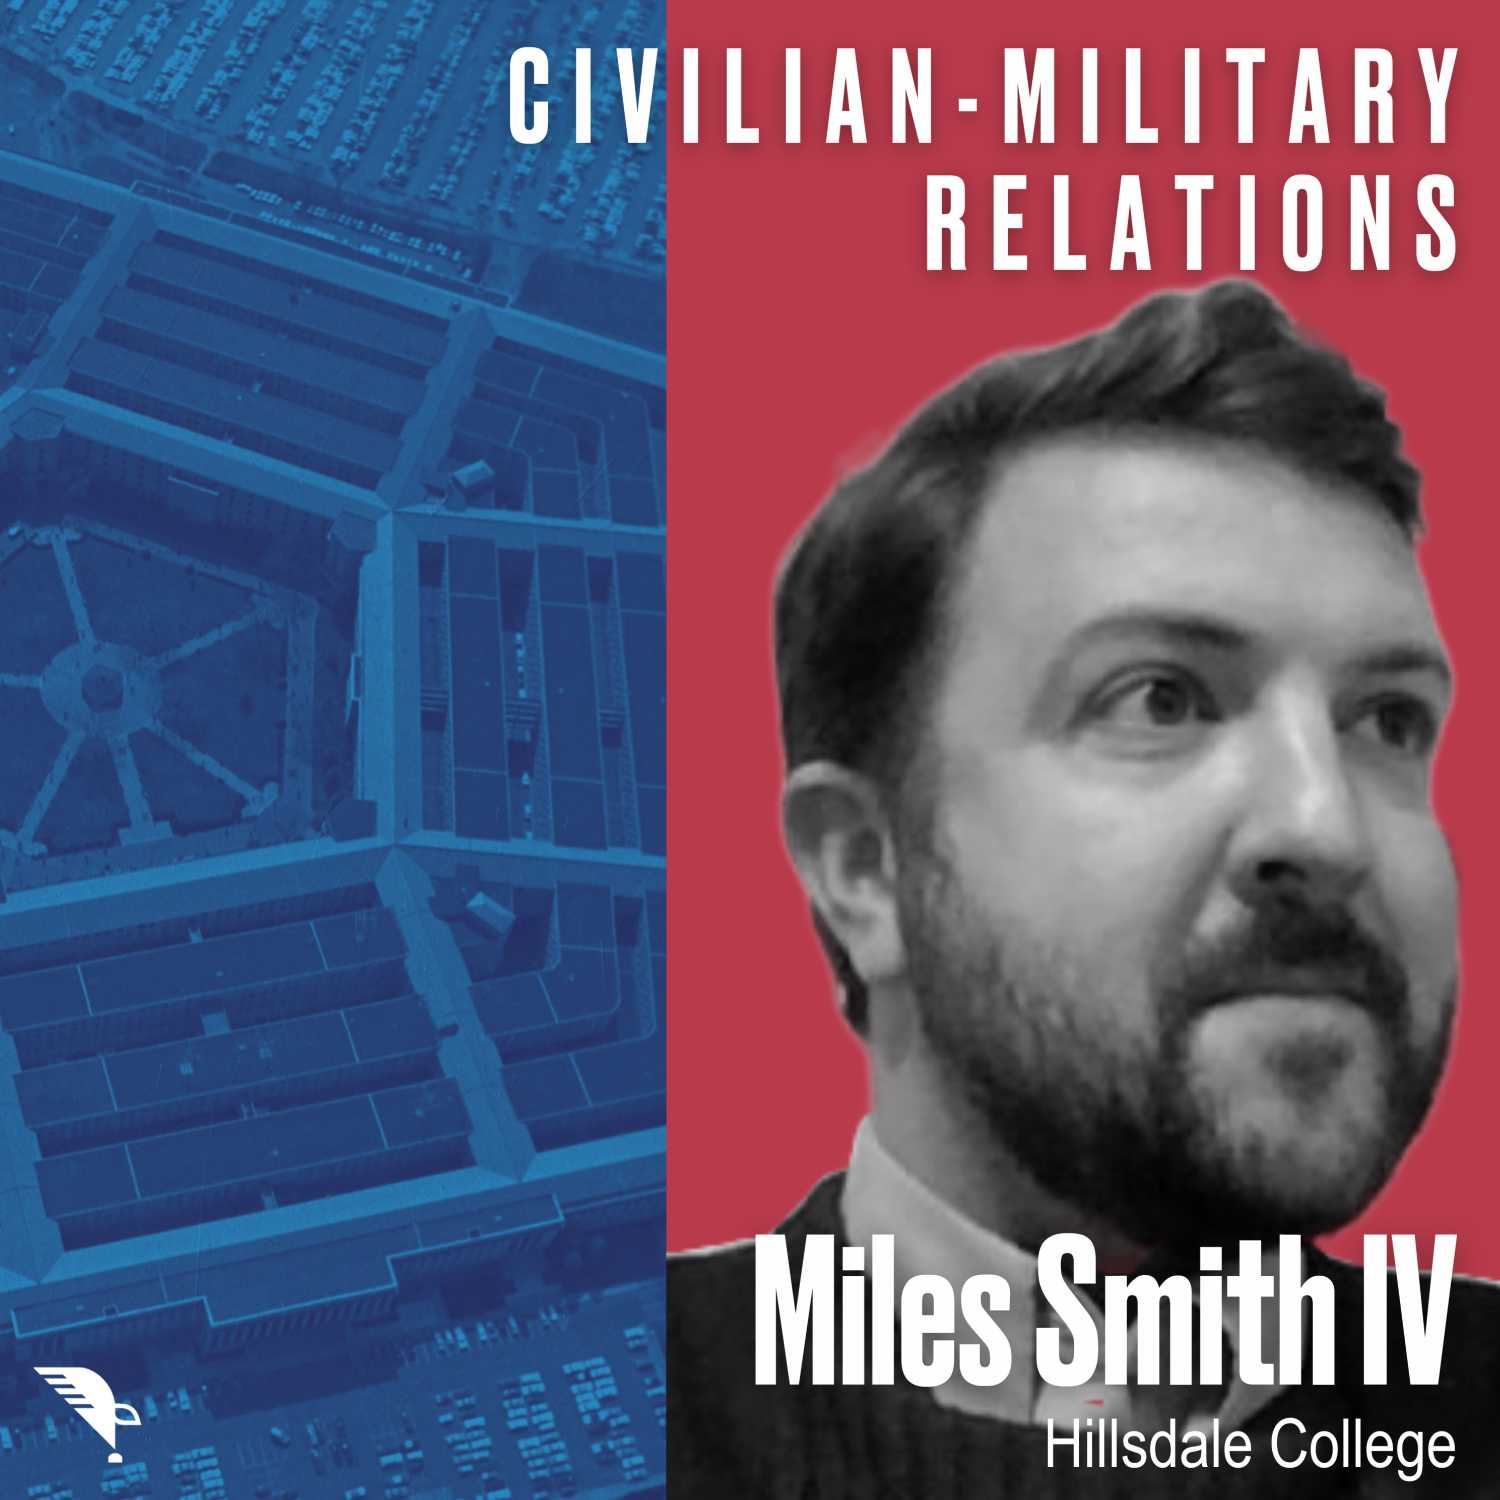 Civilian-Military Relations from the Founding to Today